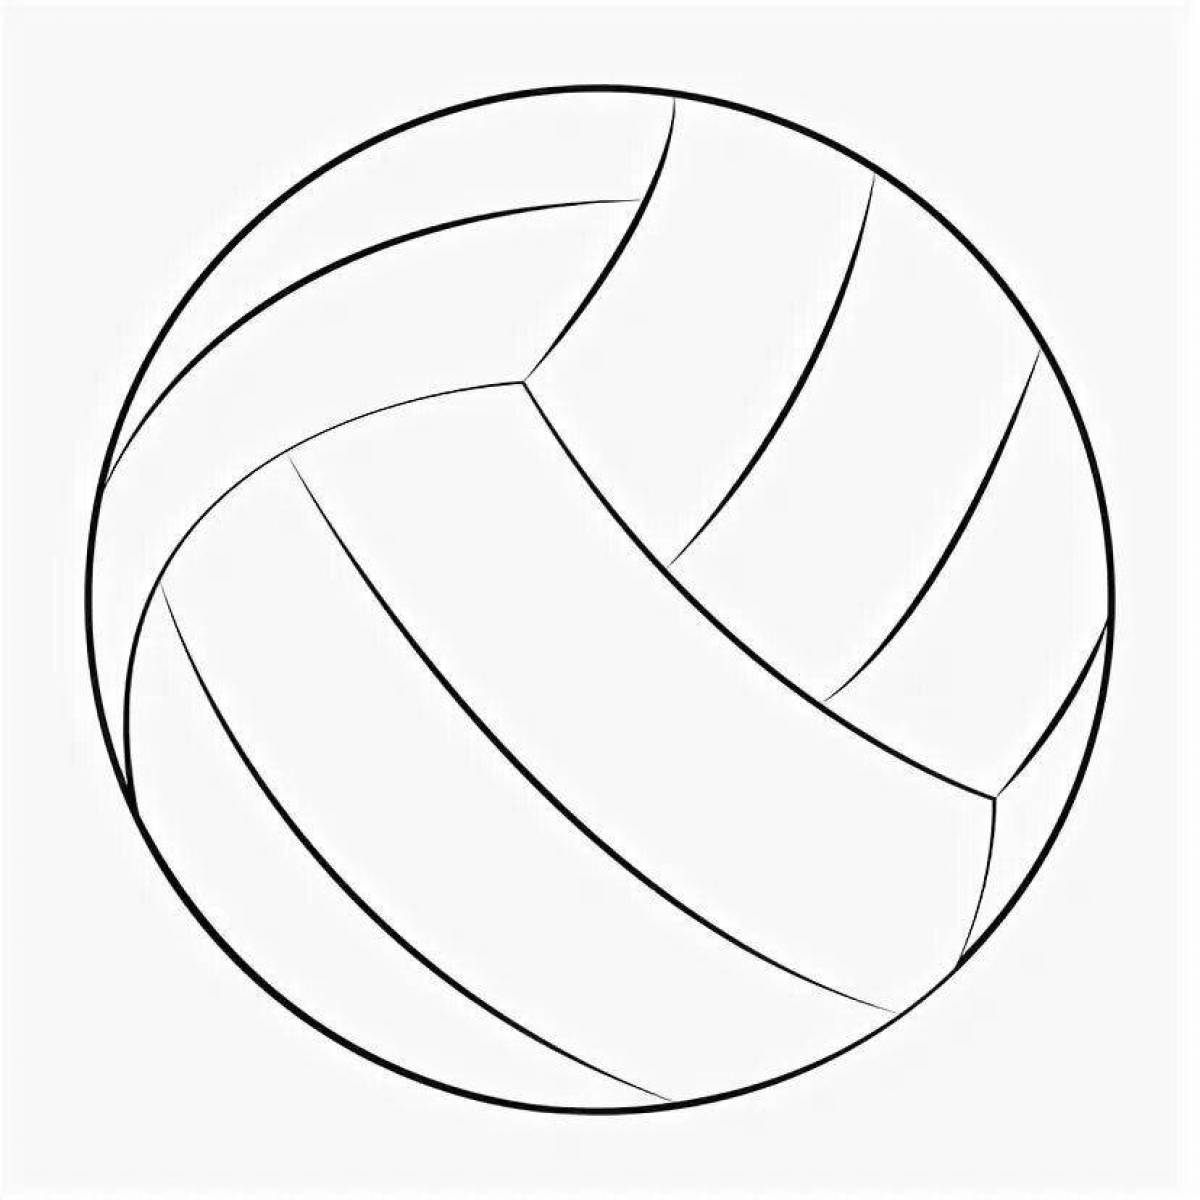 Fun volleyball coloring book